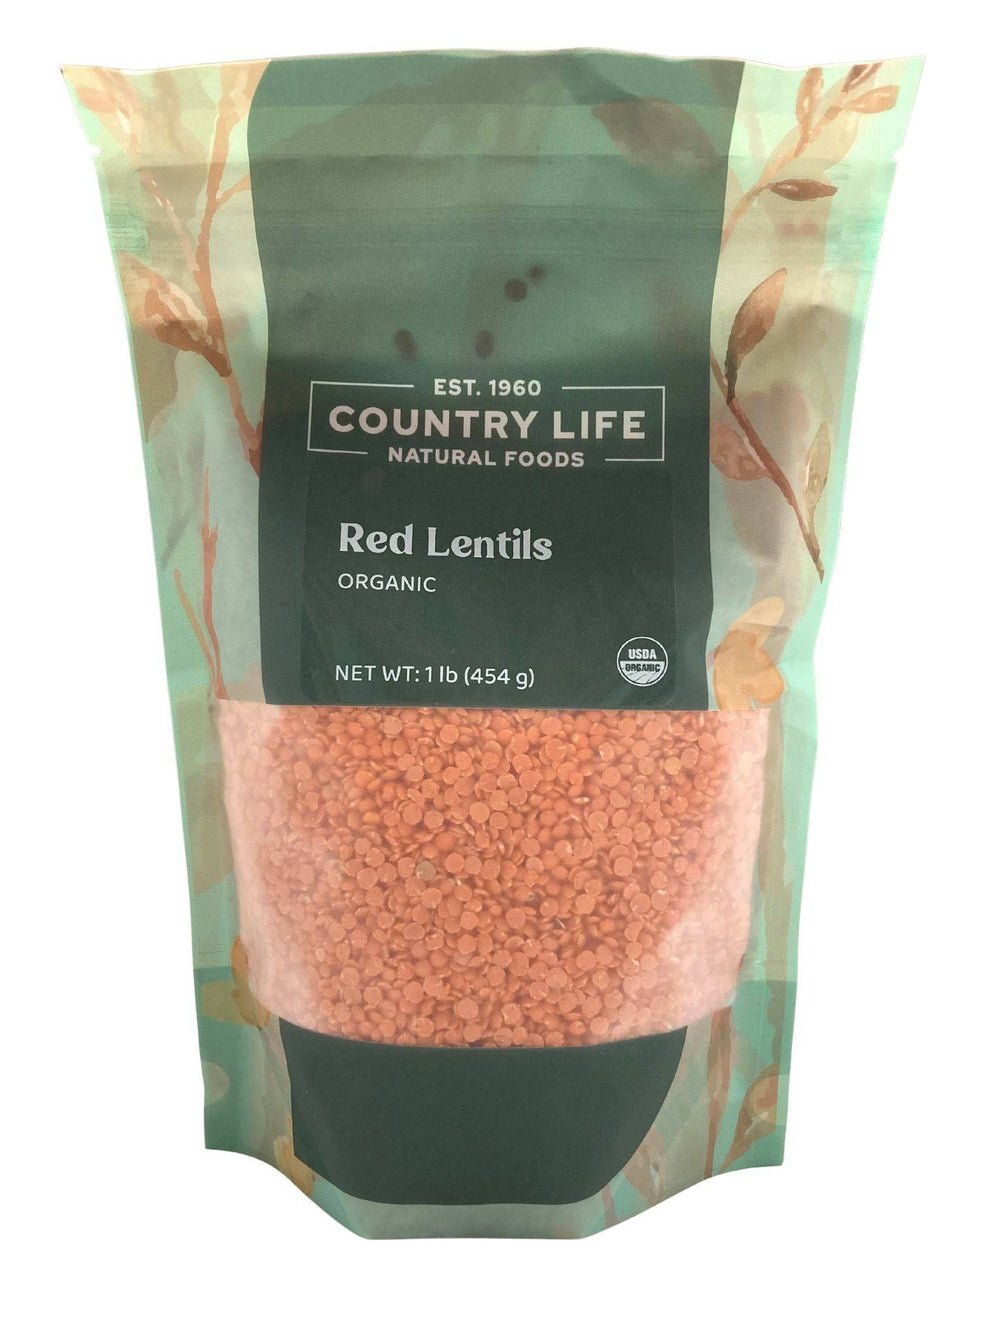 Organic Lentils, Red - Country Life Natural Foods